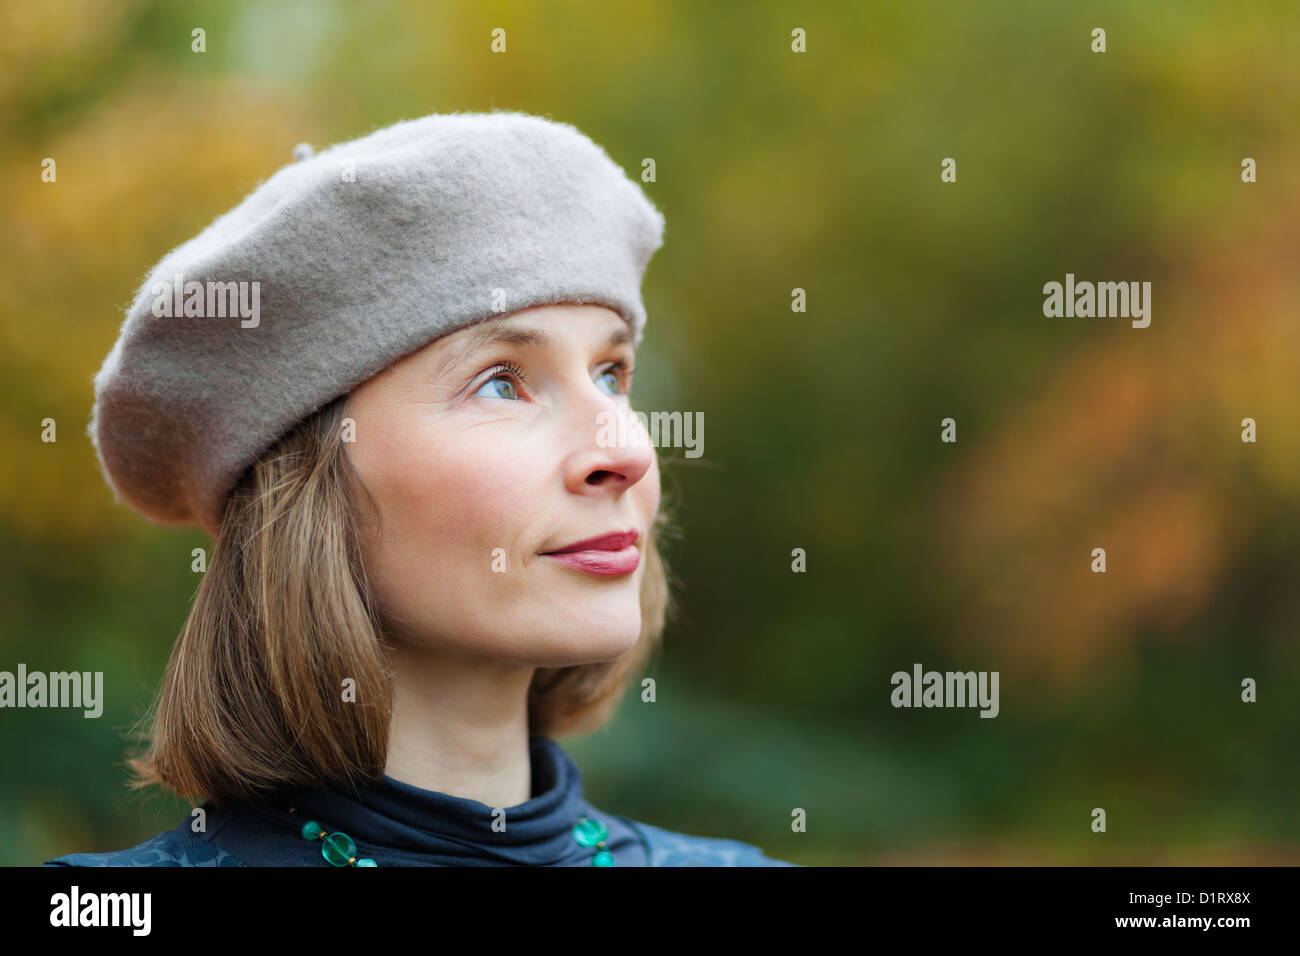 Outdoor portrait of cheerful middle aged woman wearing grey beret Stock Photo